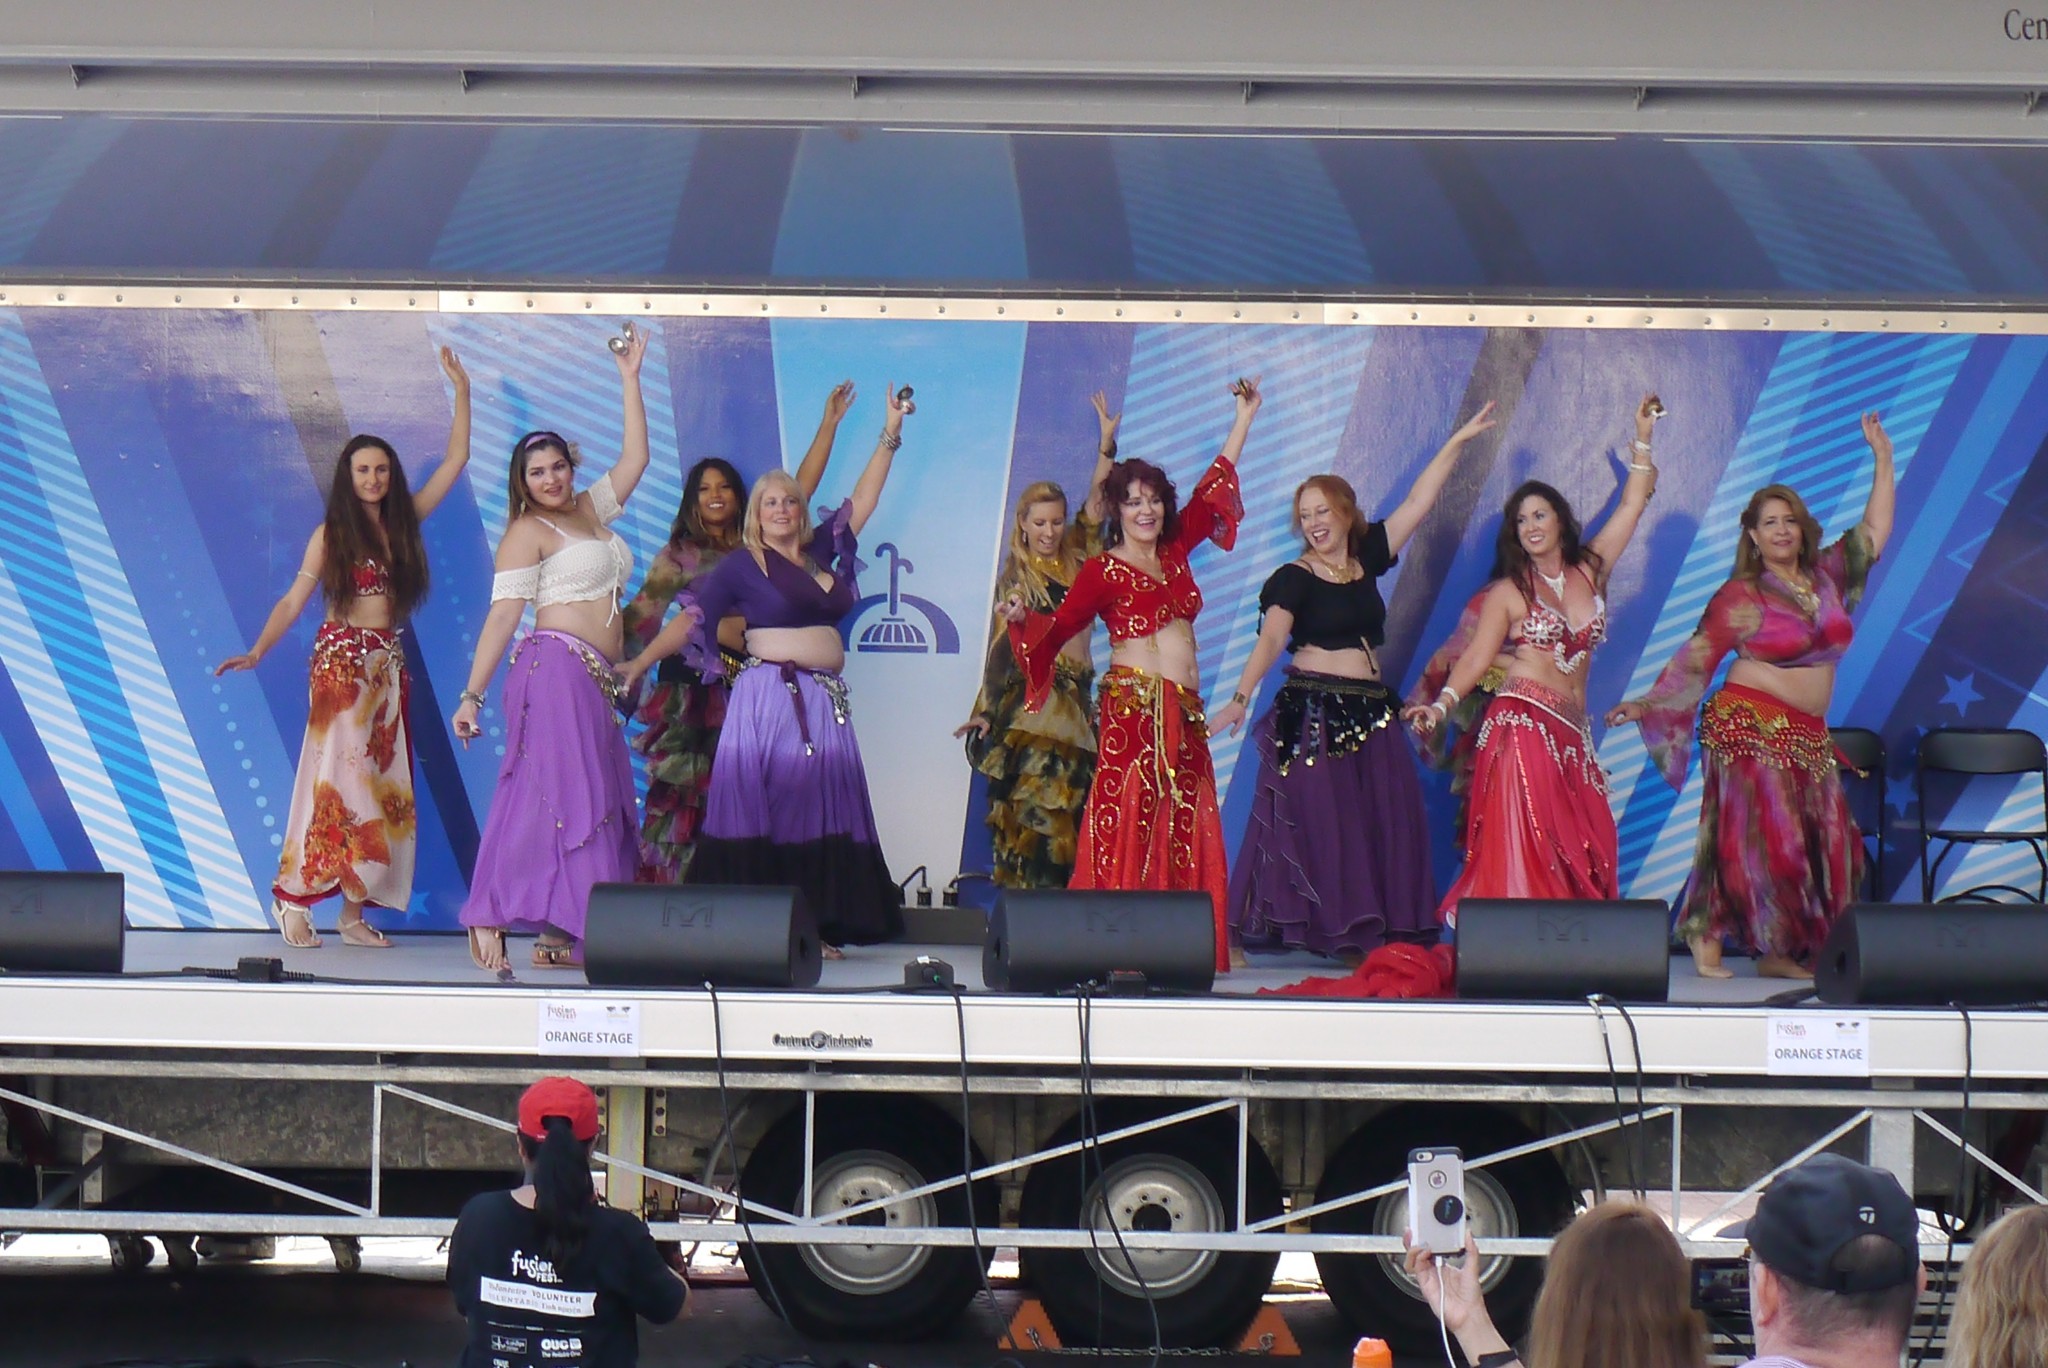 A Magi Temple Belly Dance School & Entertainment Productions